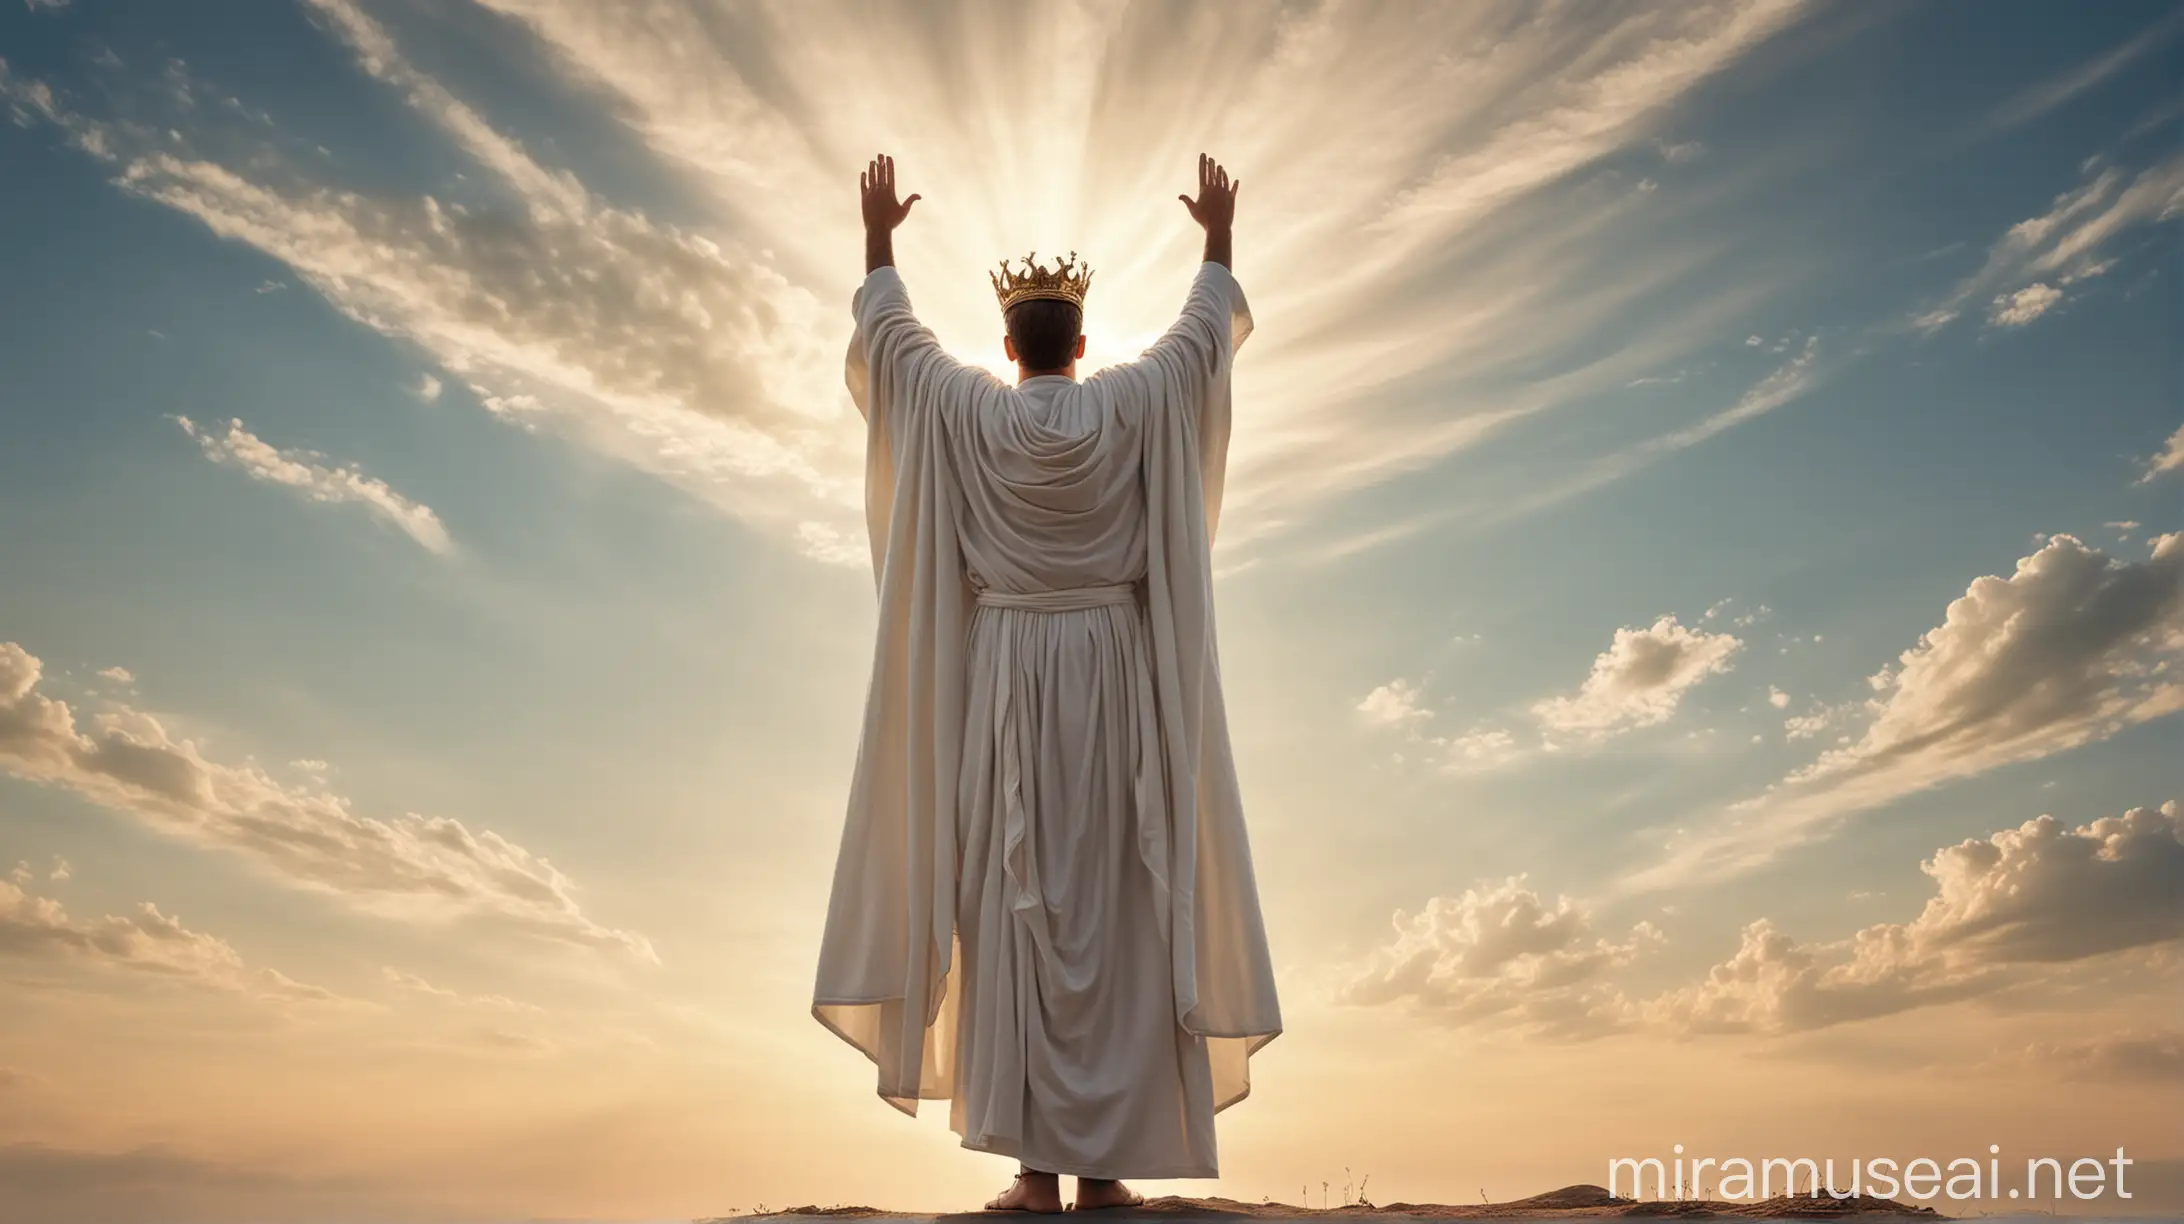 a man in a long white cloth, crown on head, standing under a peaceful sky, looking up, victory pose, biblical, back view